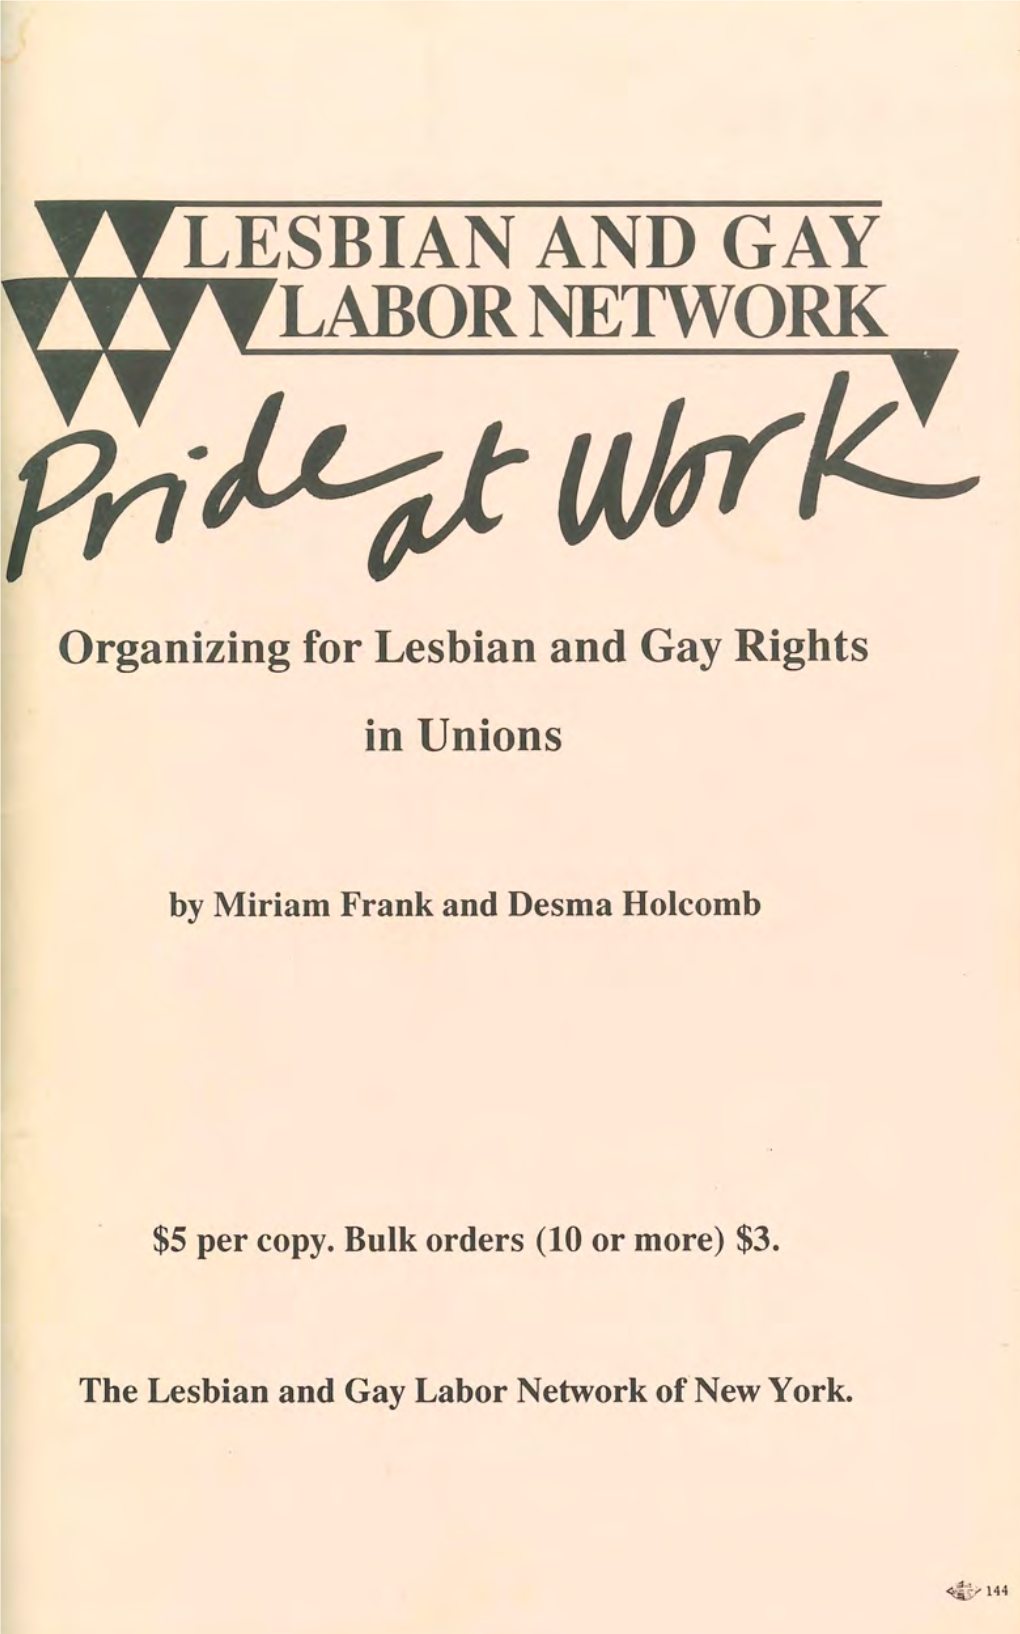 Pride at Work: Organizing for Lesbian and Gay Rights in Unions Pride at Work: Organizing for Lesbian and Gay Rights in Unions by Miriam Frank and Desma Holcomb I